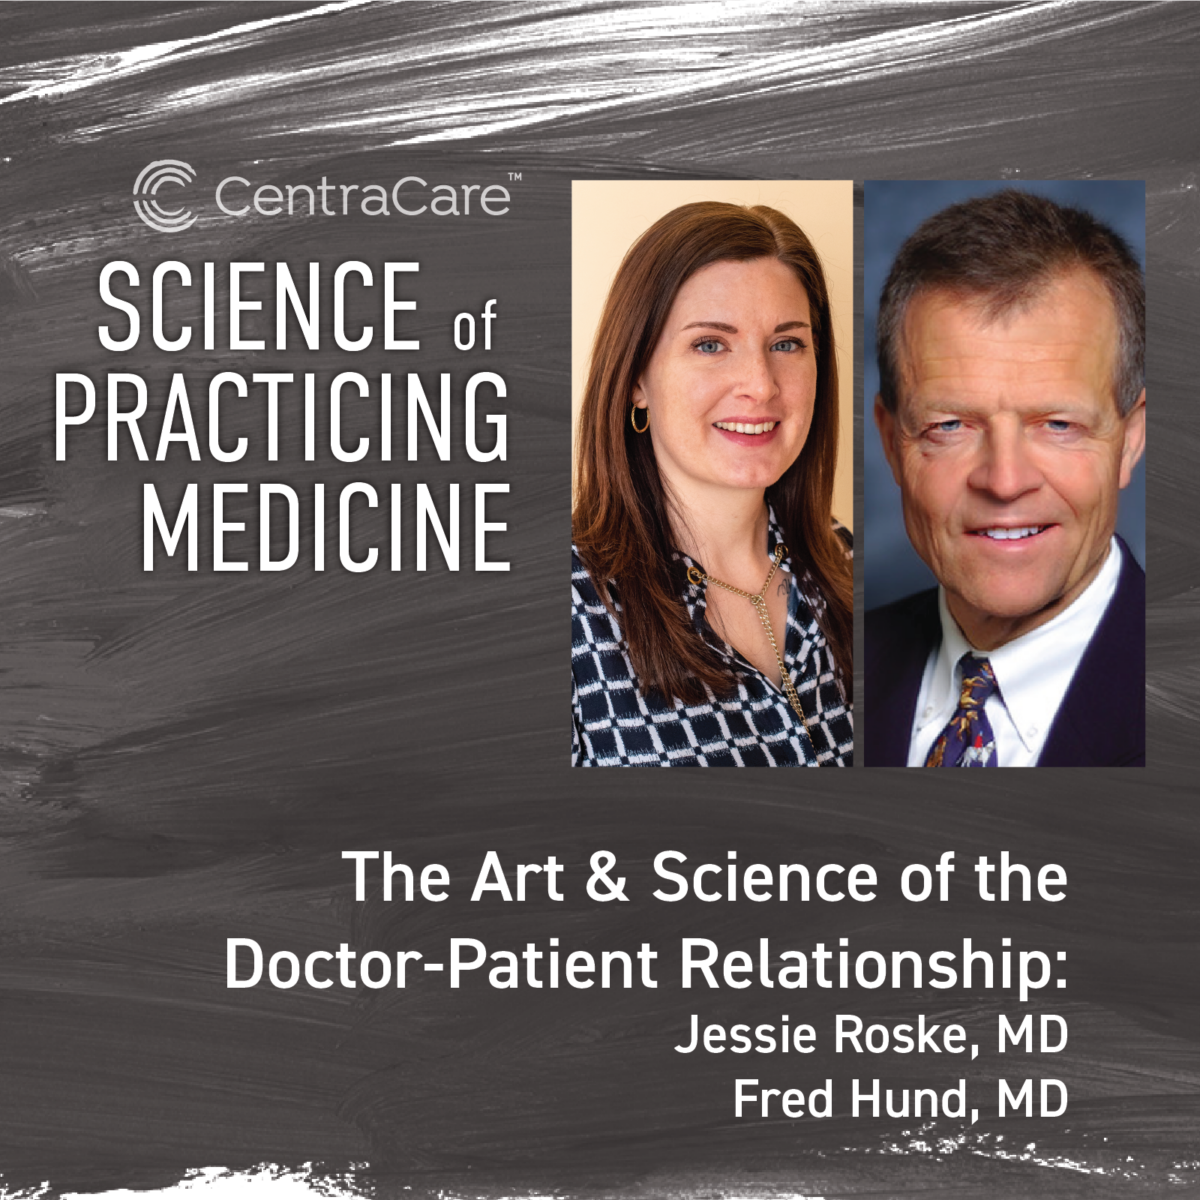 Promotion for the Science of Practicing Medicine Enduring CME with Jessie Roske, MD, and Fred Hund, MD on the Art and Science of the Doctor-Patient Relationship